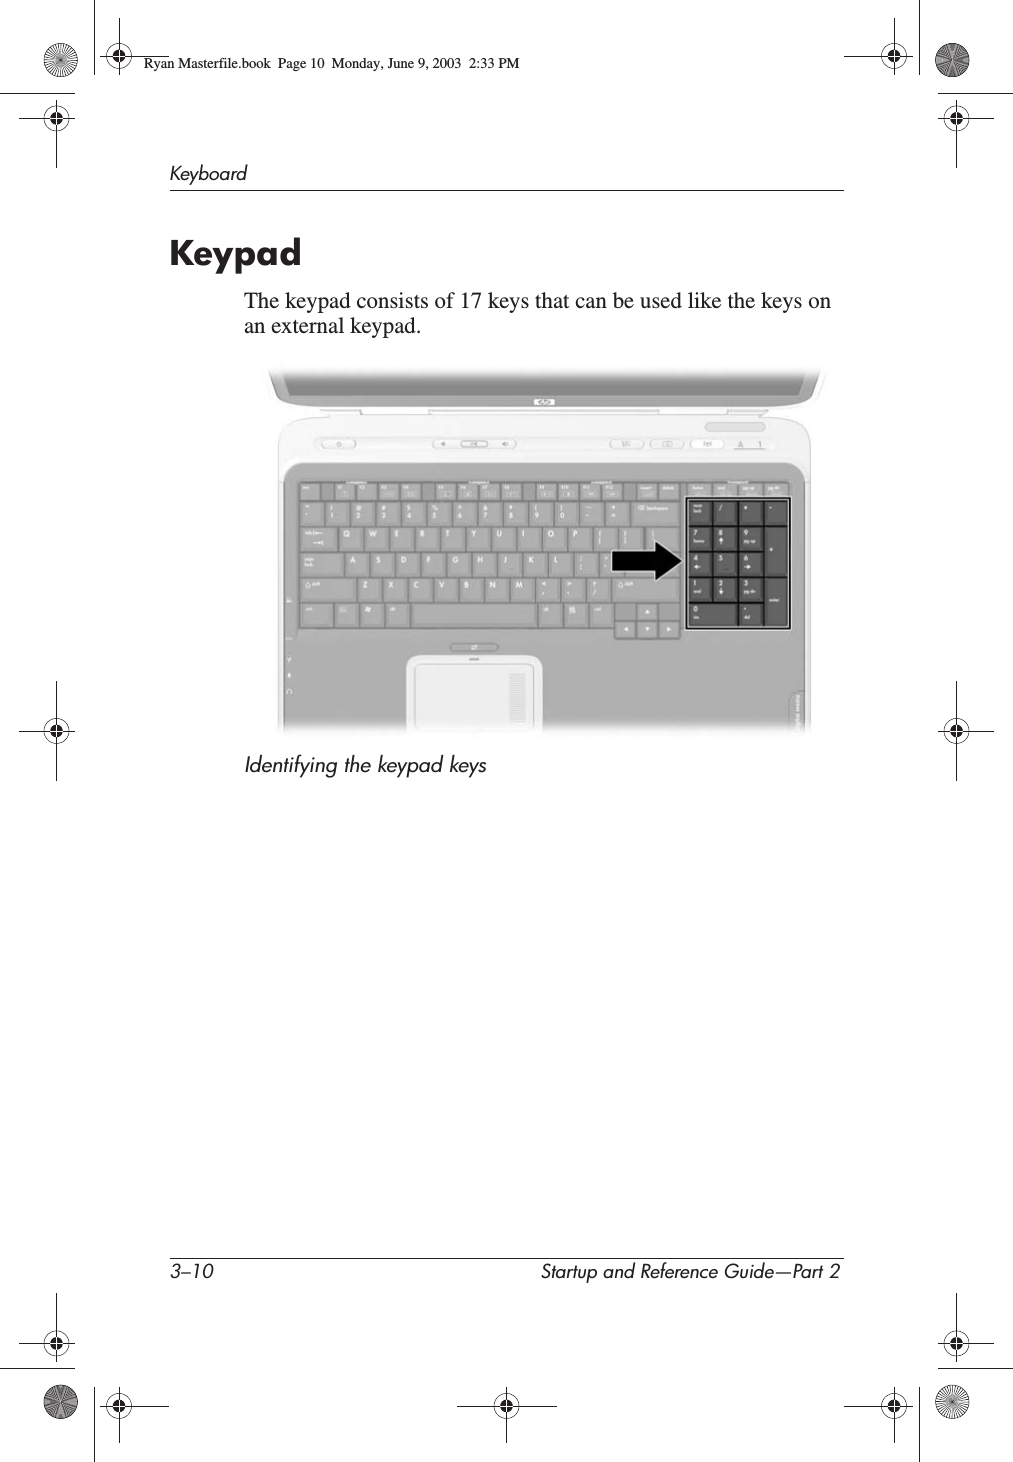 3–10 Startup and Reference Guide—Part 2KeyboardKeypadThe keypad consists of 17 keys that can be used like the keys on an external keypad.Identifying the keypad keysRyan Masterfile.book  Page 10  Monday, June 9, 2003  2:33 PM